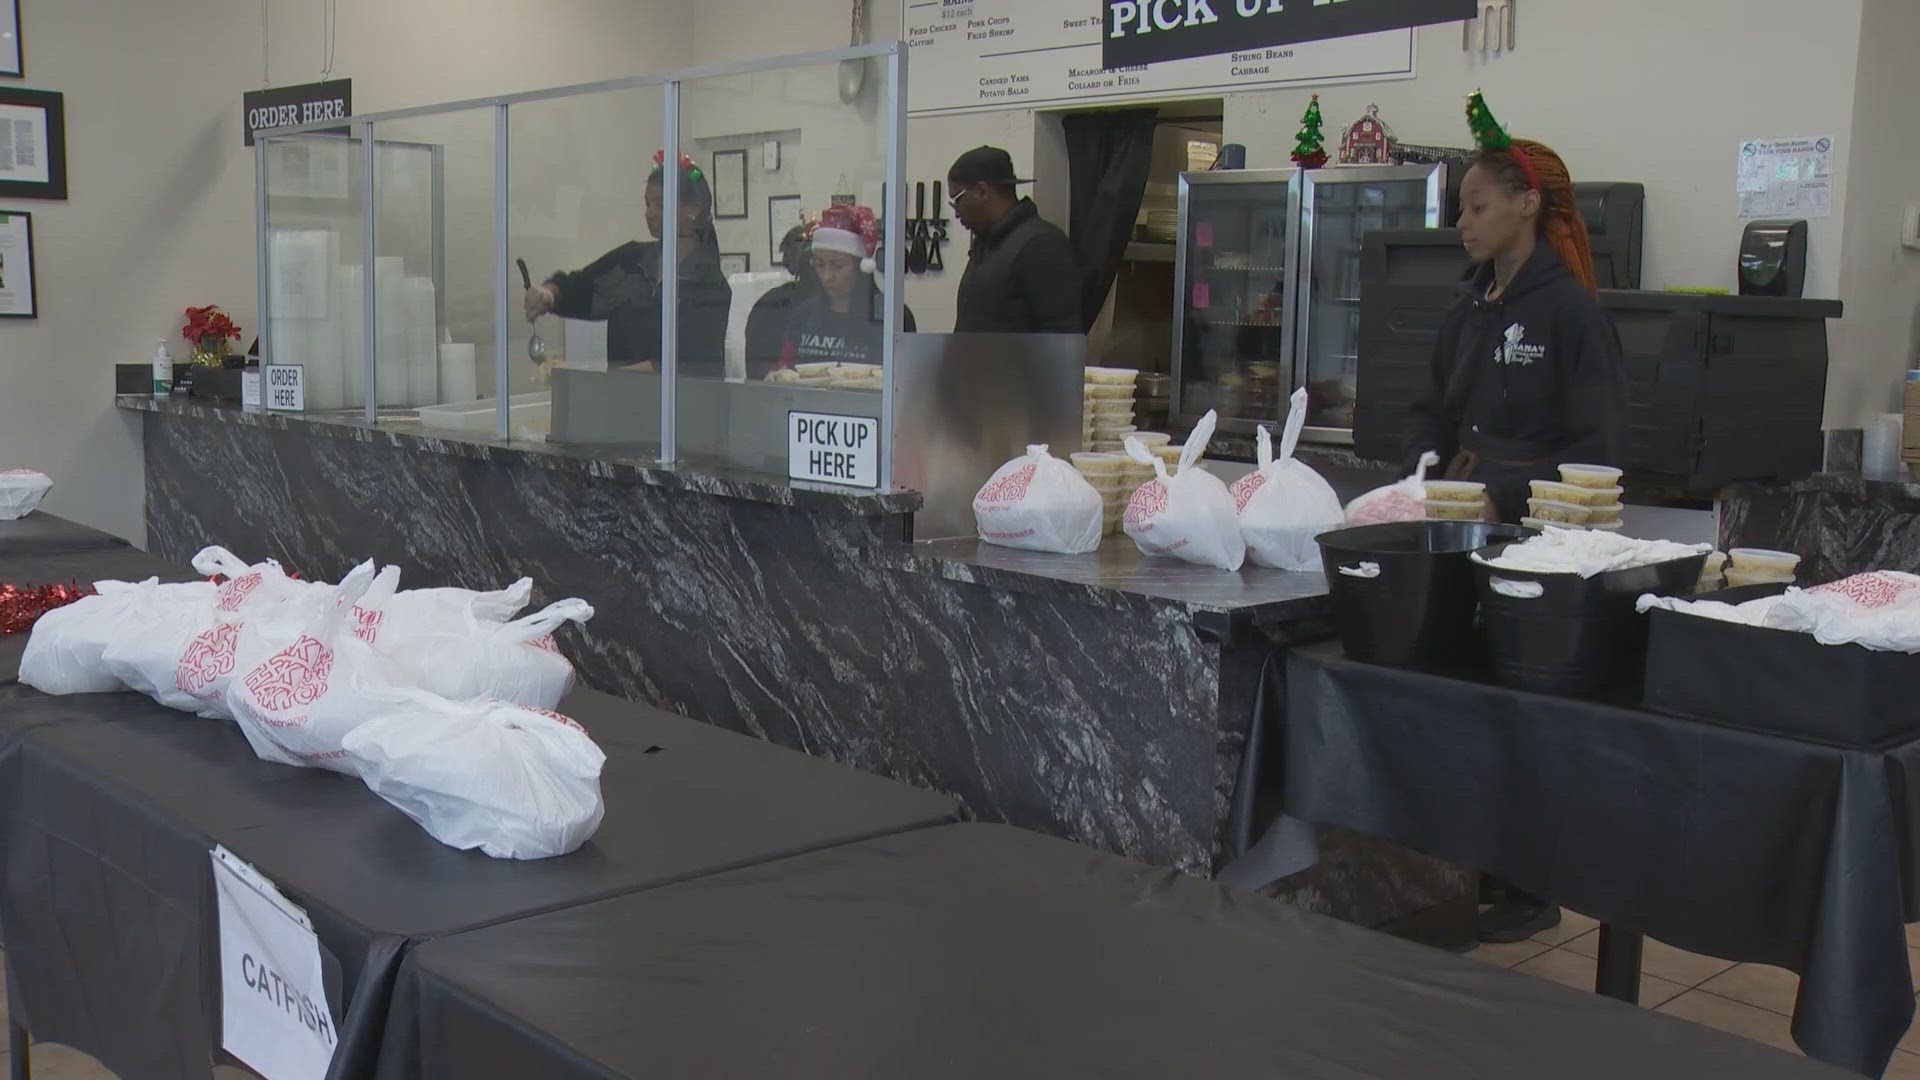 With generous donations from the community, the soul food restaurant in Kent has been able to give out thousands of meals the last four years.